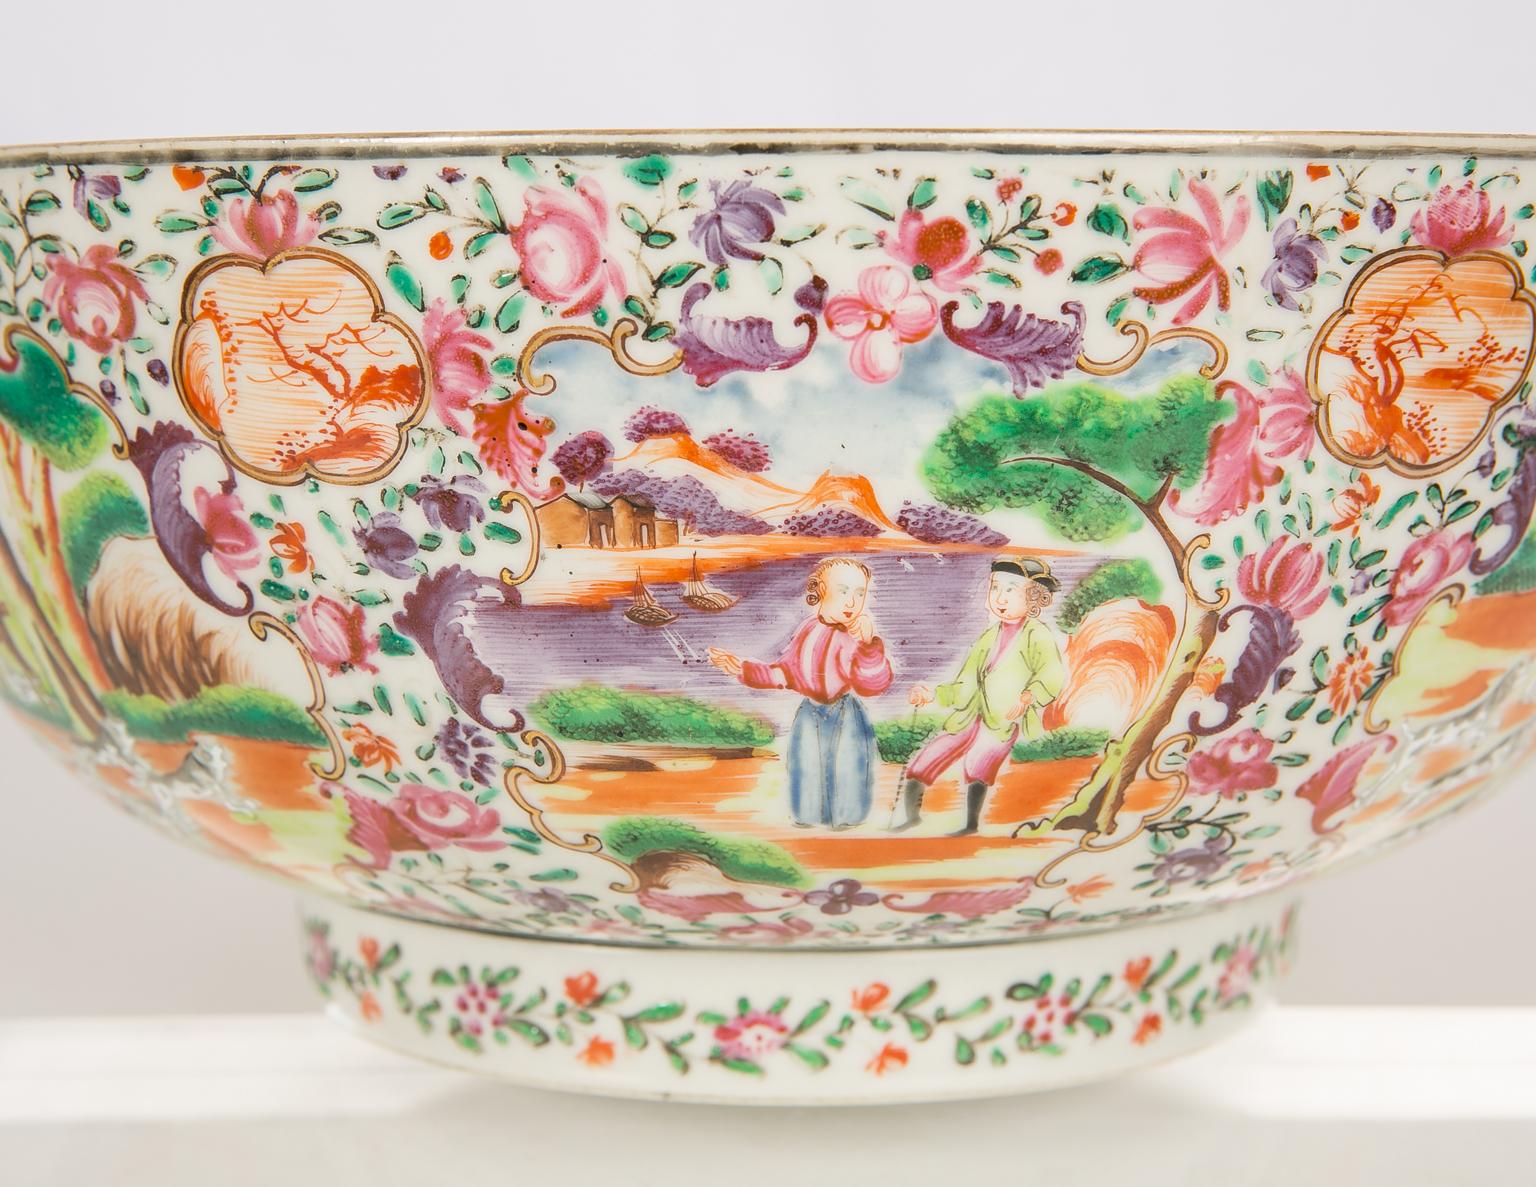 Hand-Painted Antique Chinese Porcelain Hunt Bowl circa 1770